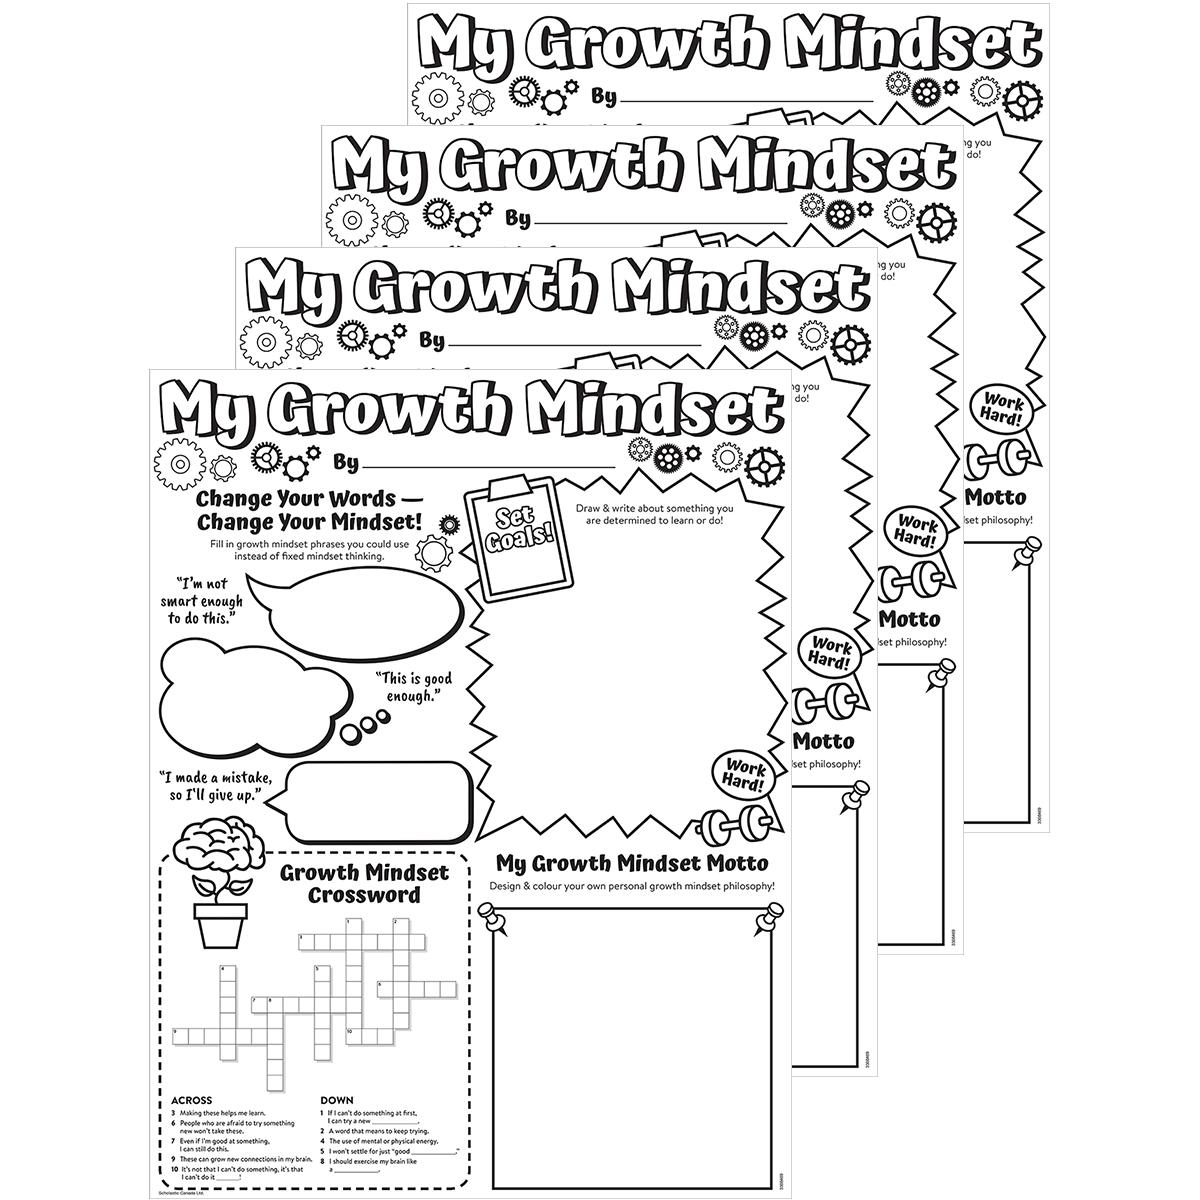  My Growth Mindset Poster Papers 